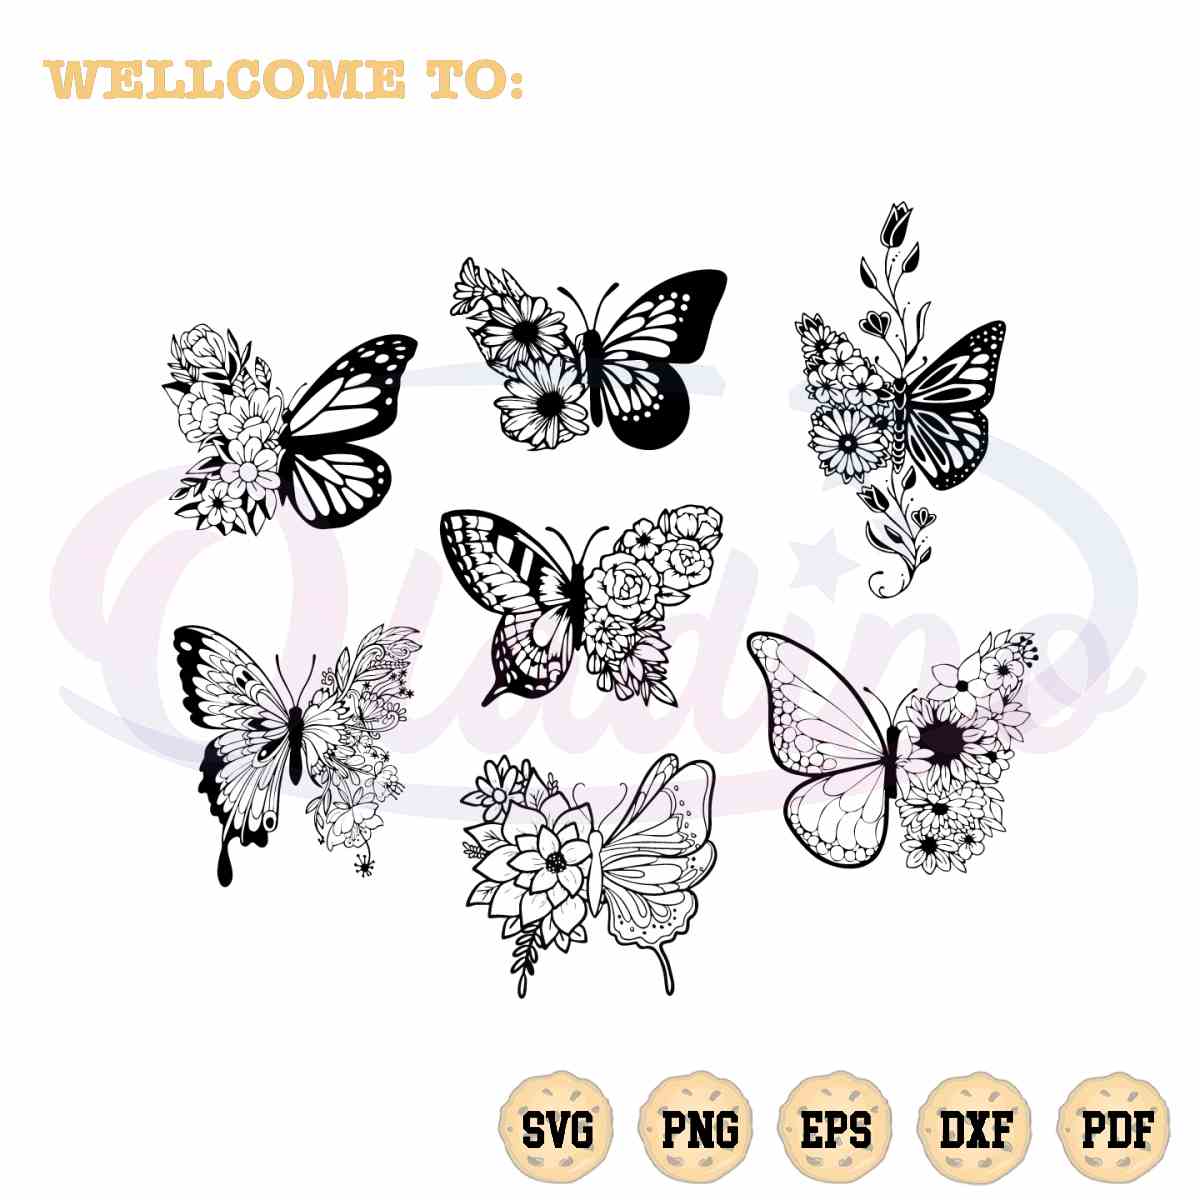 Floral Butterfly Bundle Retro SVG Best Graphic Design Cutting File